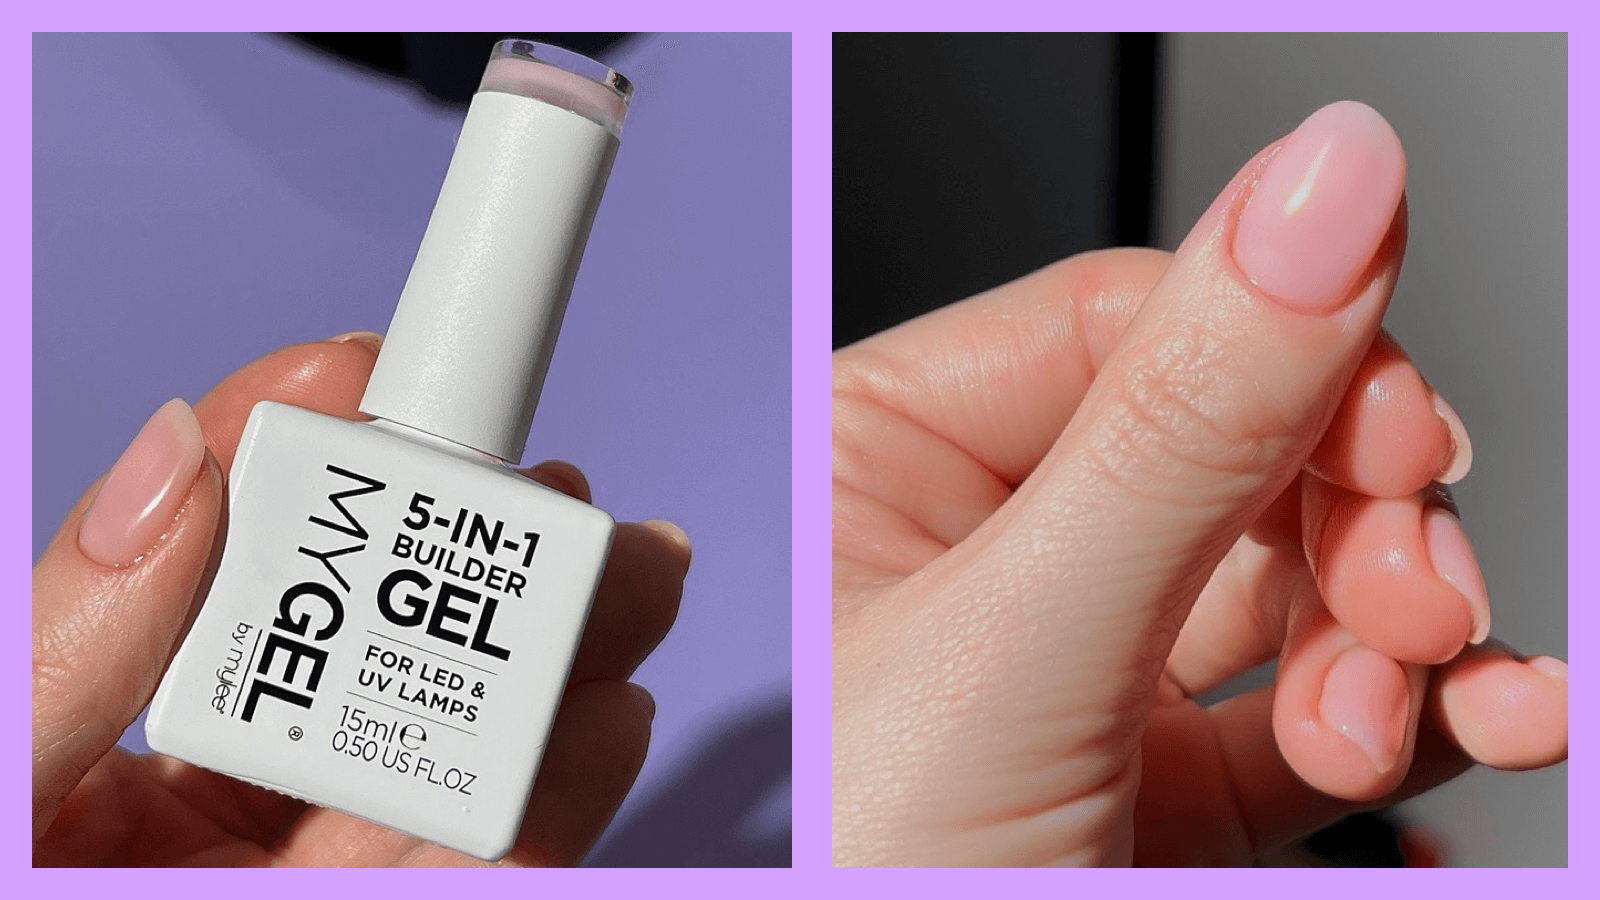 The Ultimate Builder Gel Guide: How Much Do You Know?